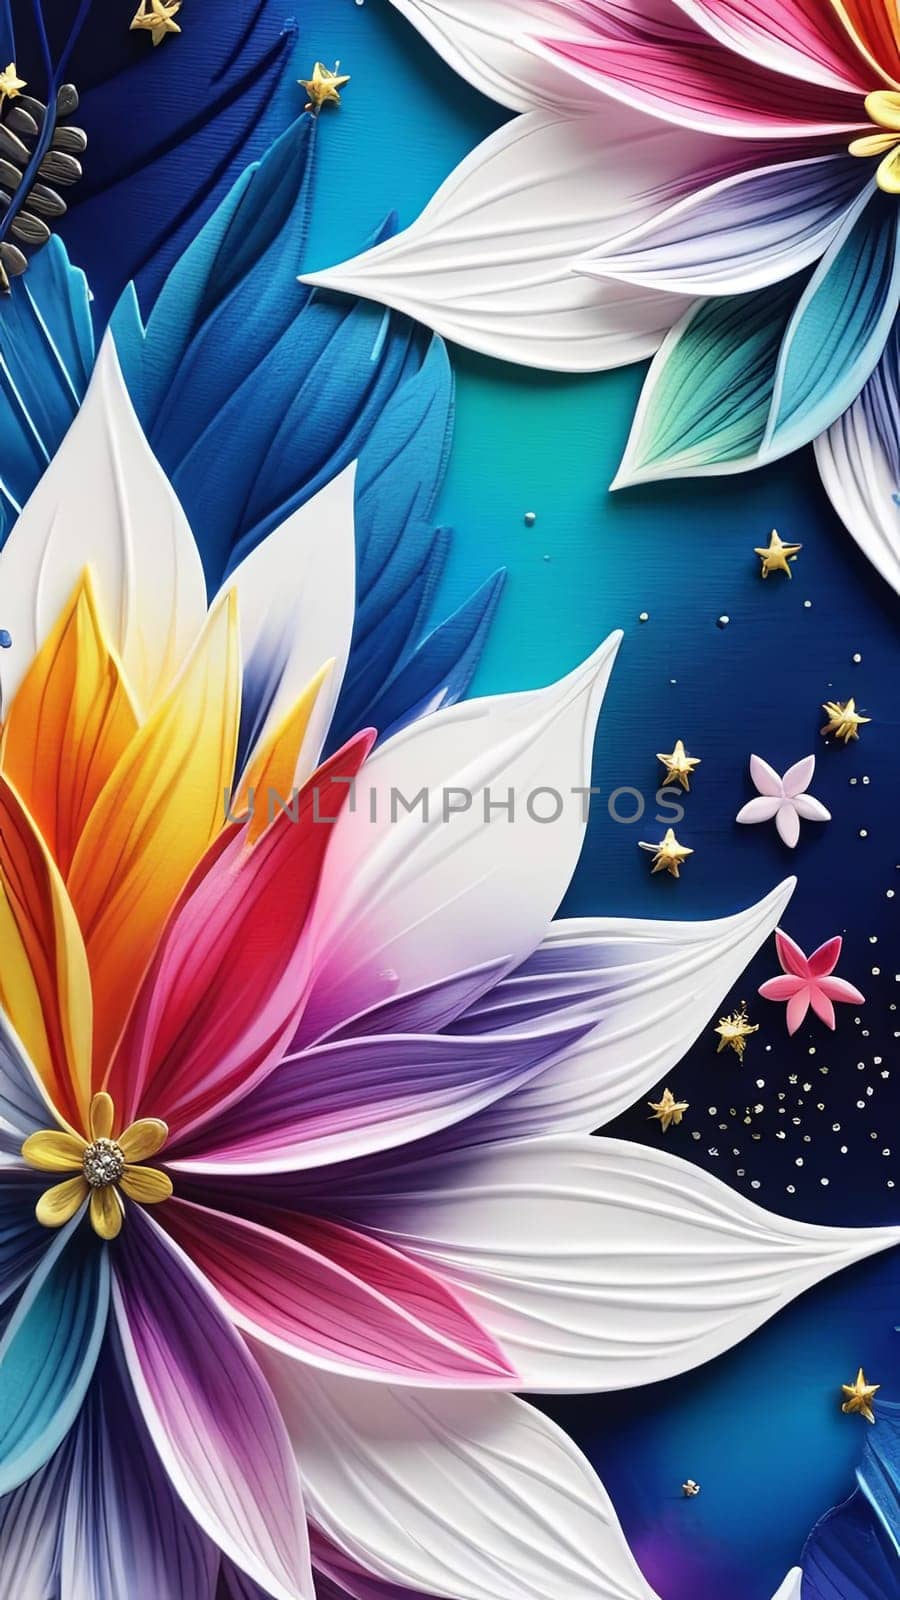 Beautiful lotus flower blooming against dark background. Lotus is symbol of purity, beauty, spiritual enlightenment in many cultures. For interior, commercial spaces to create stylish atmosphere